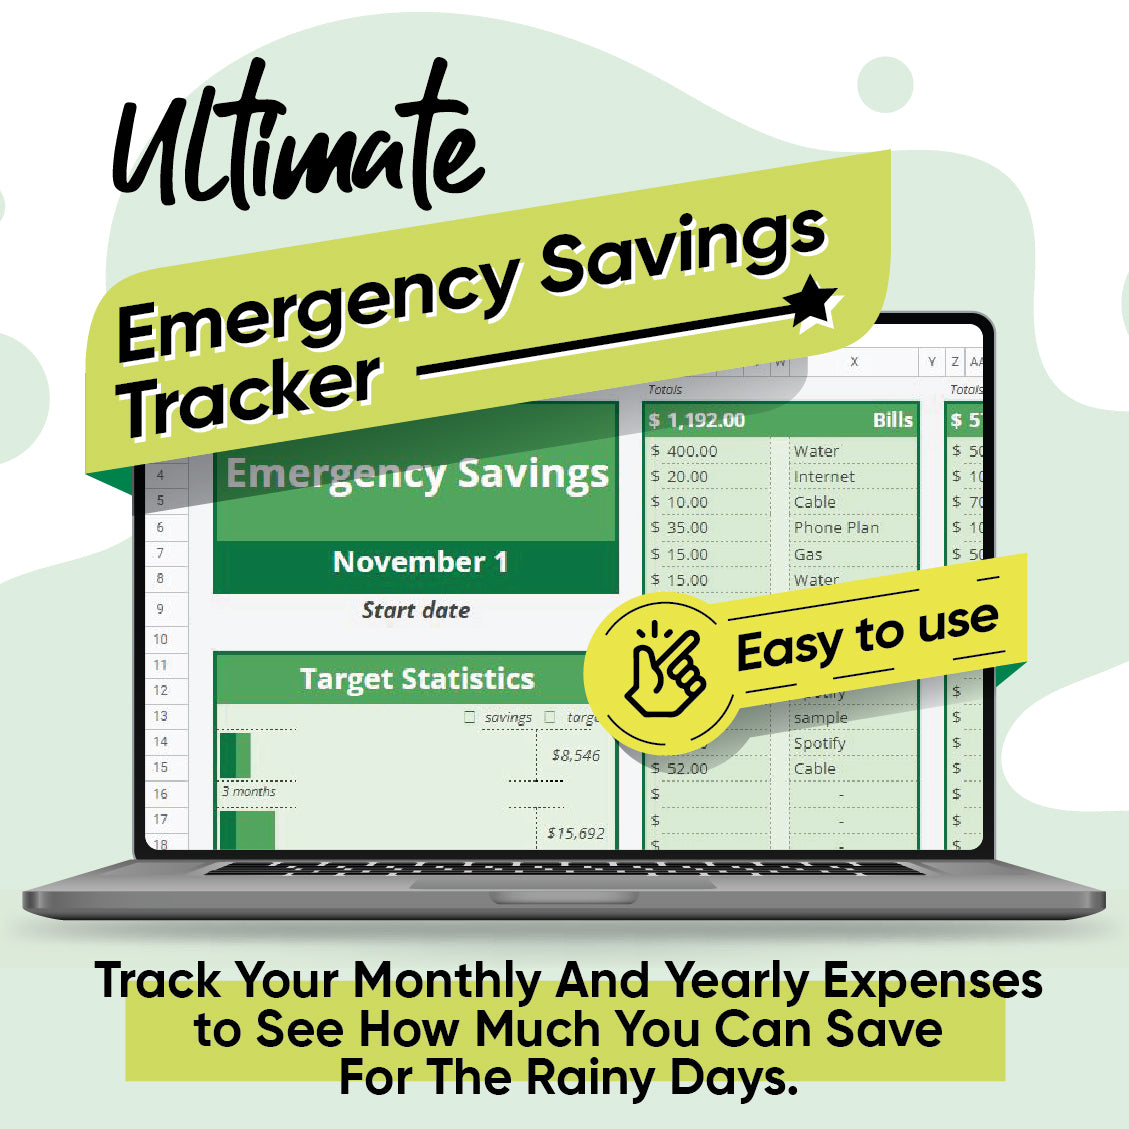 Ultimate Emergency Savings Tracker - Easy to use & lifetime access